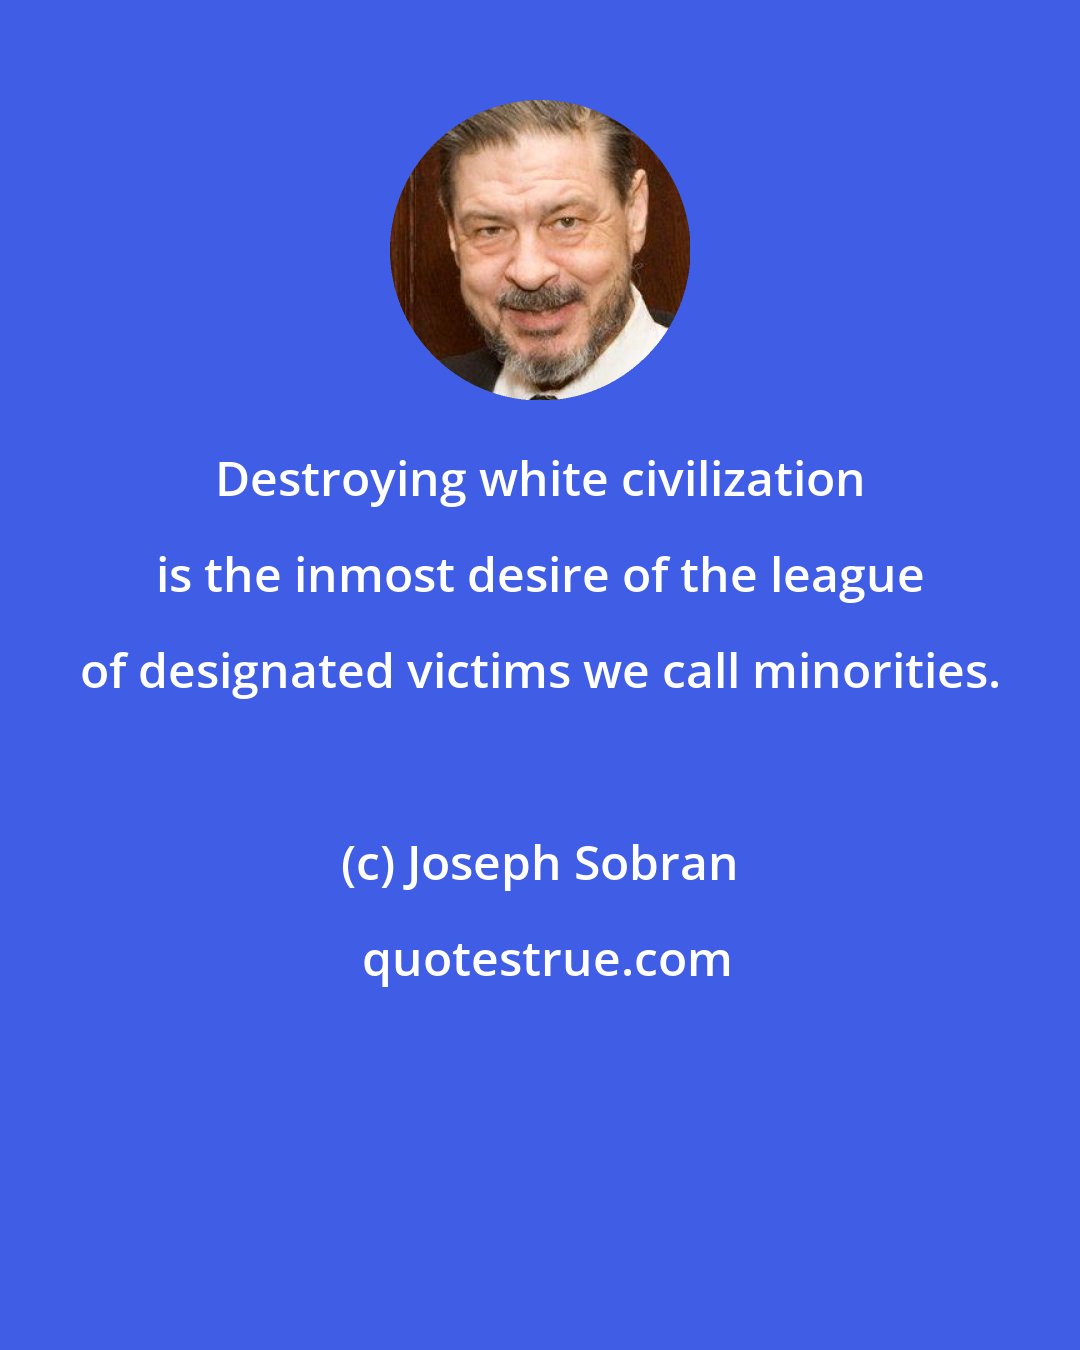 Joseph Sobran: Destroying white civilization is the inmost desire of the league of designated victims we call minorities.